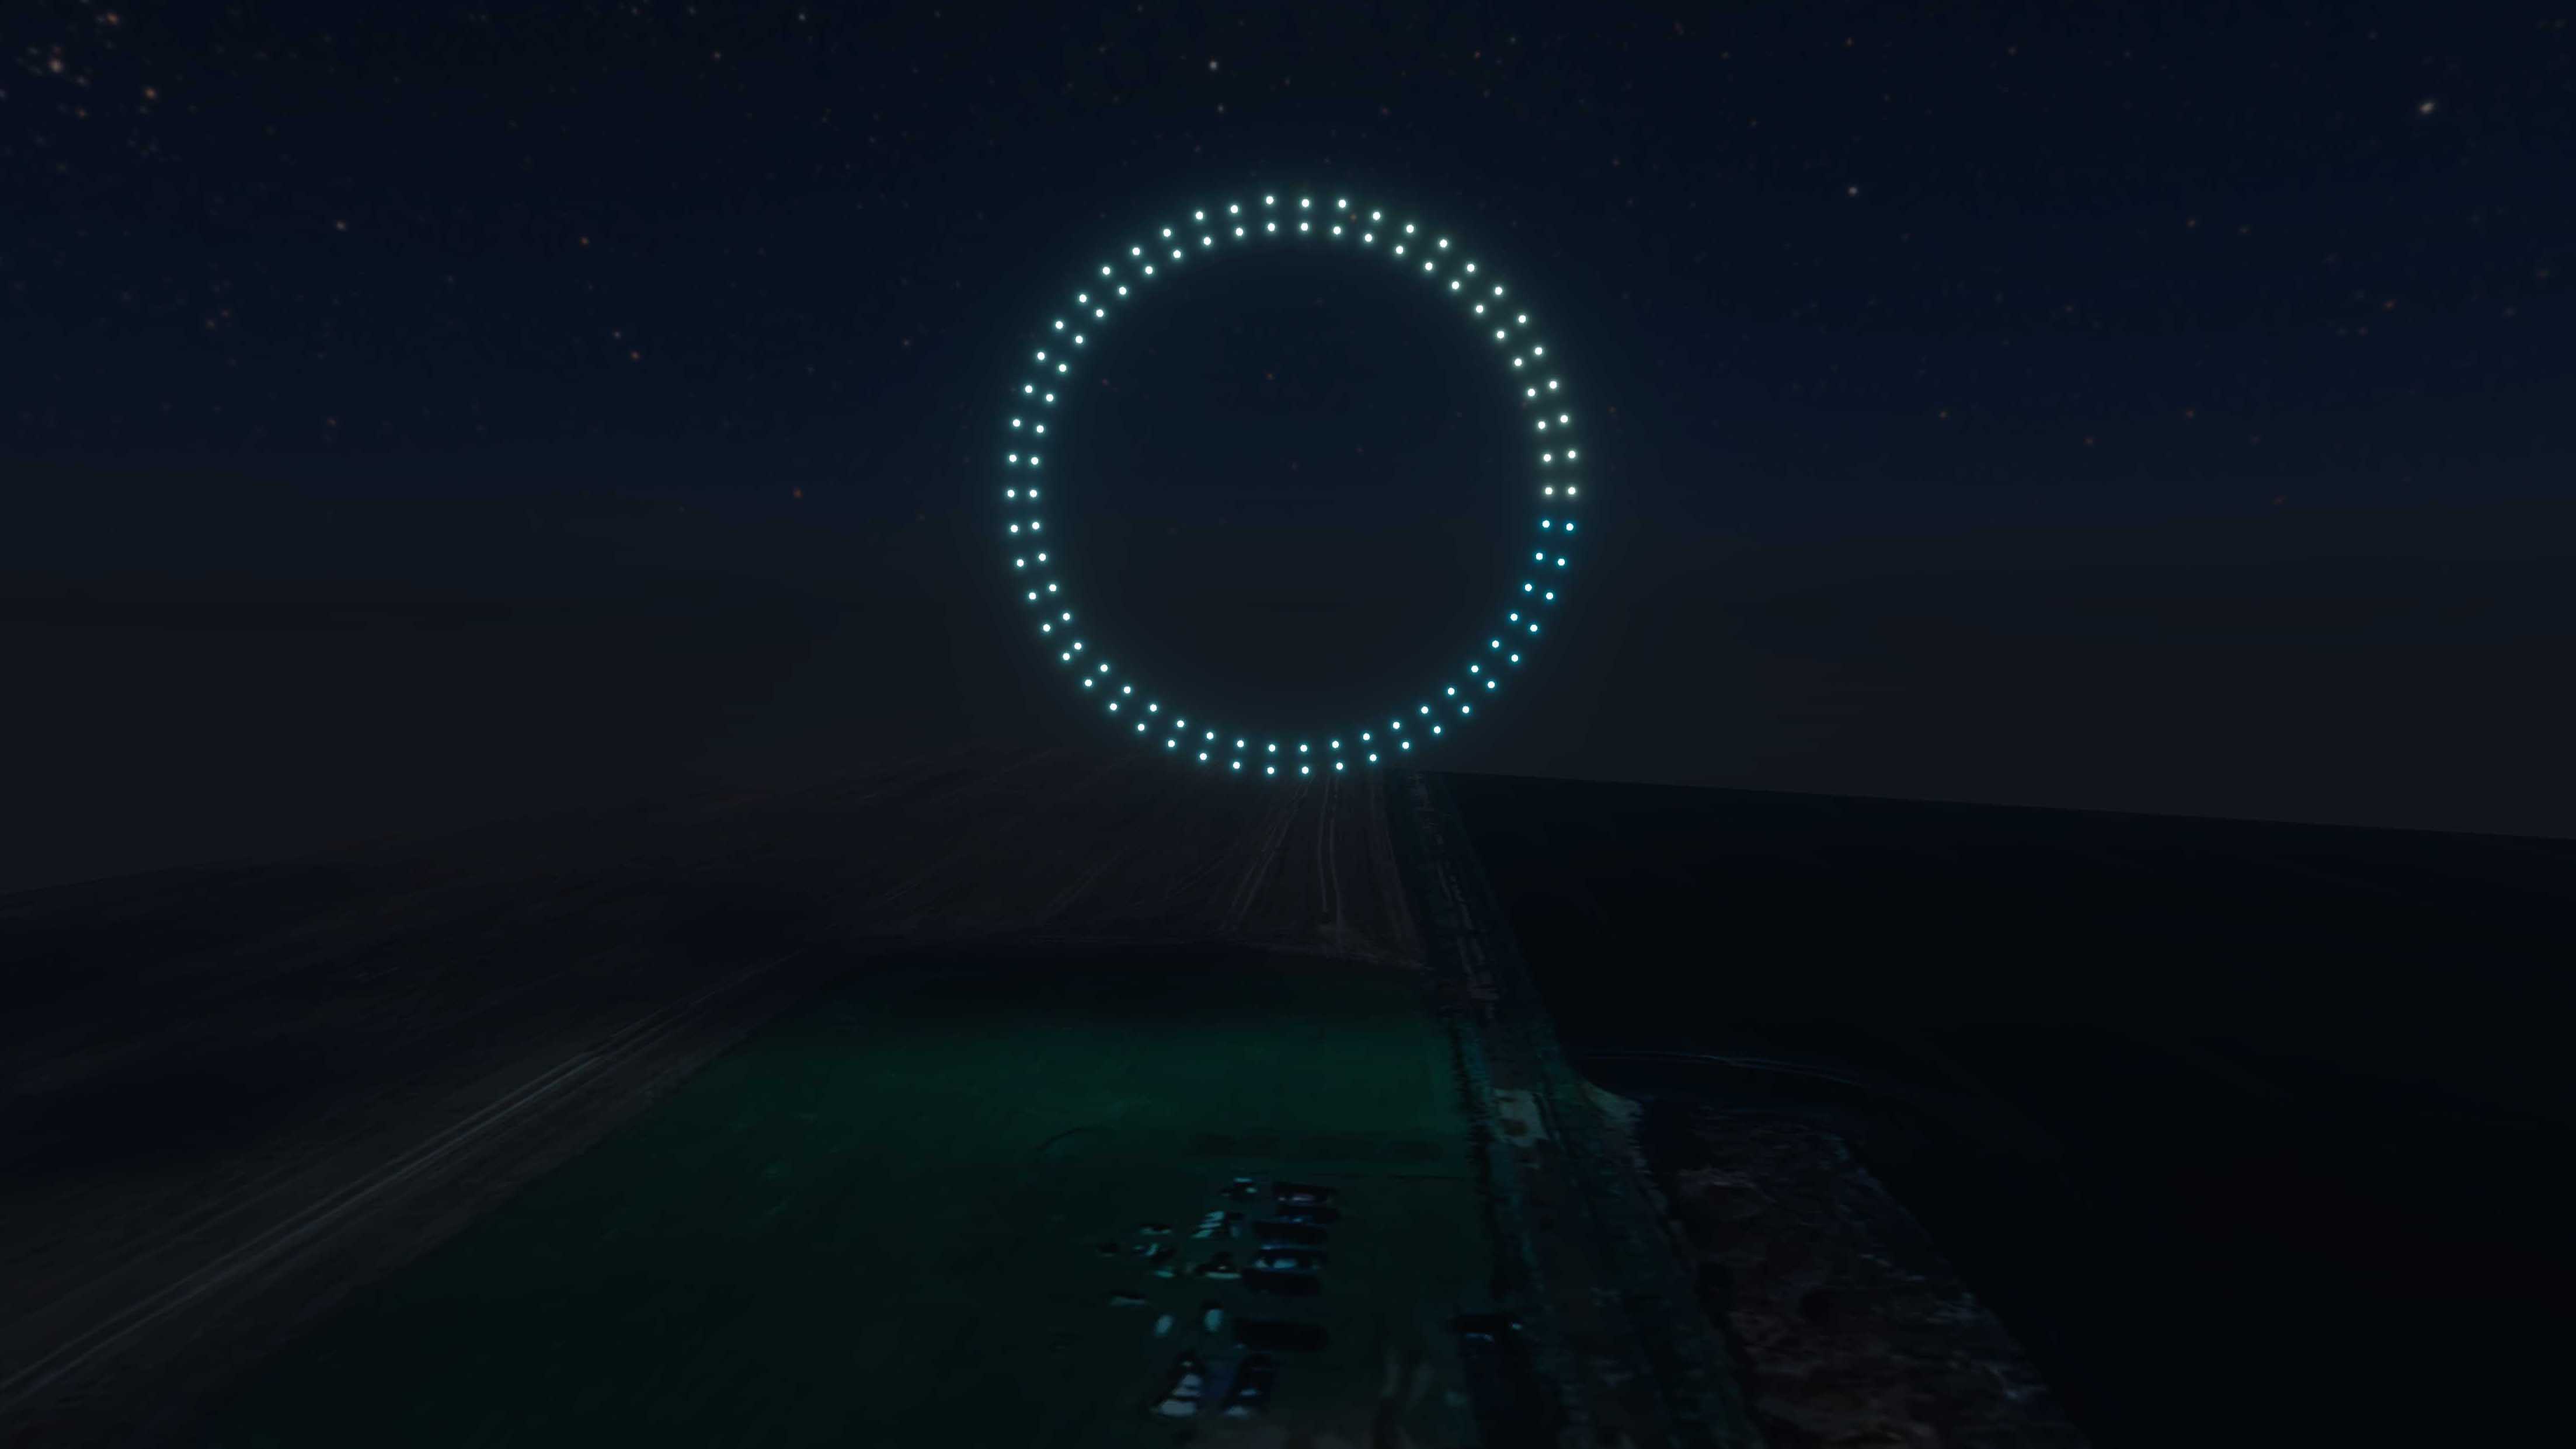 50 show drones forming a circle